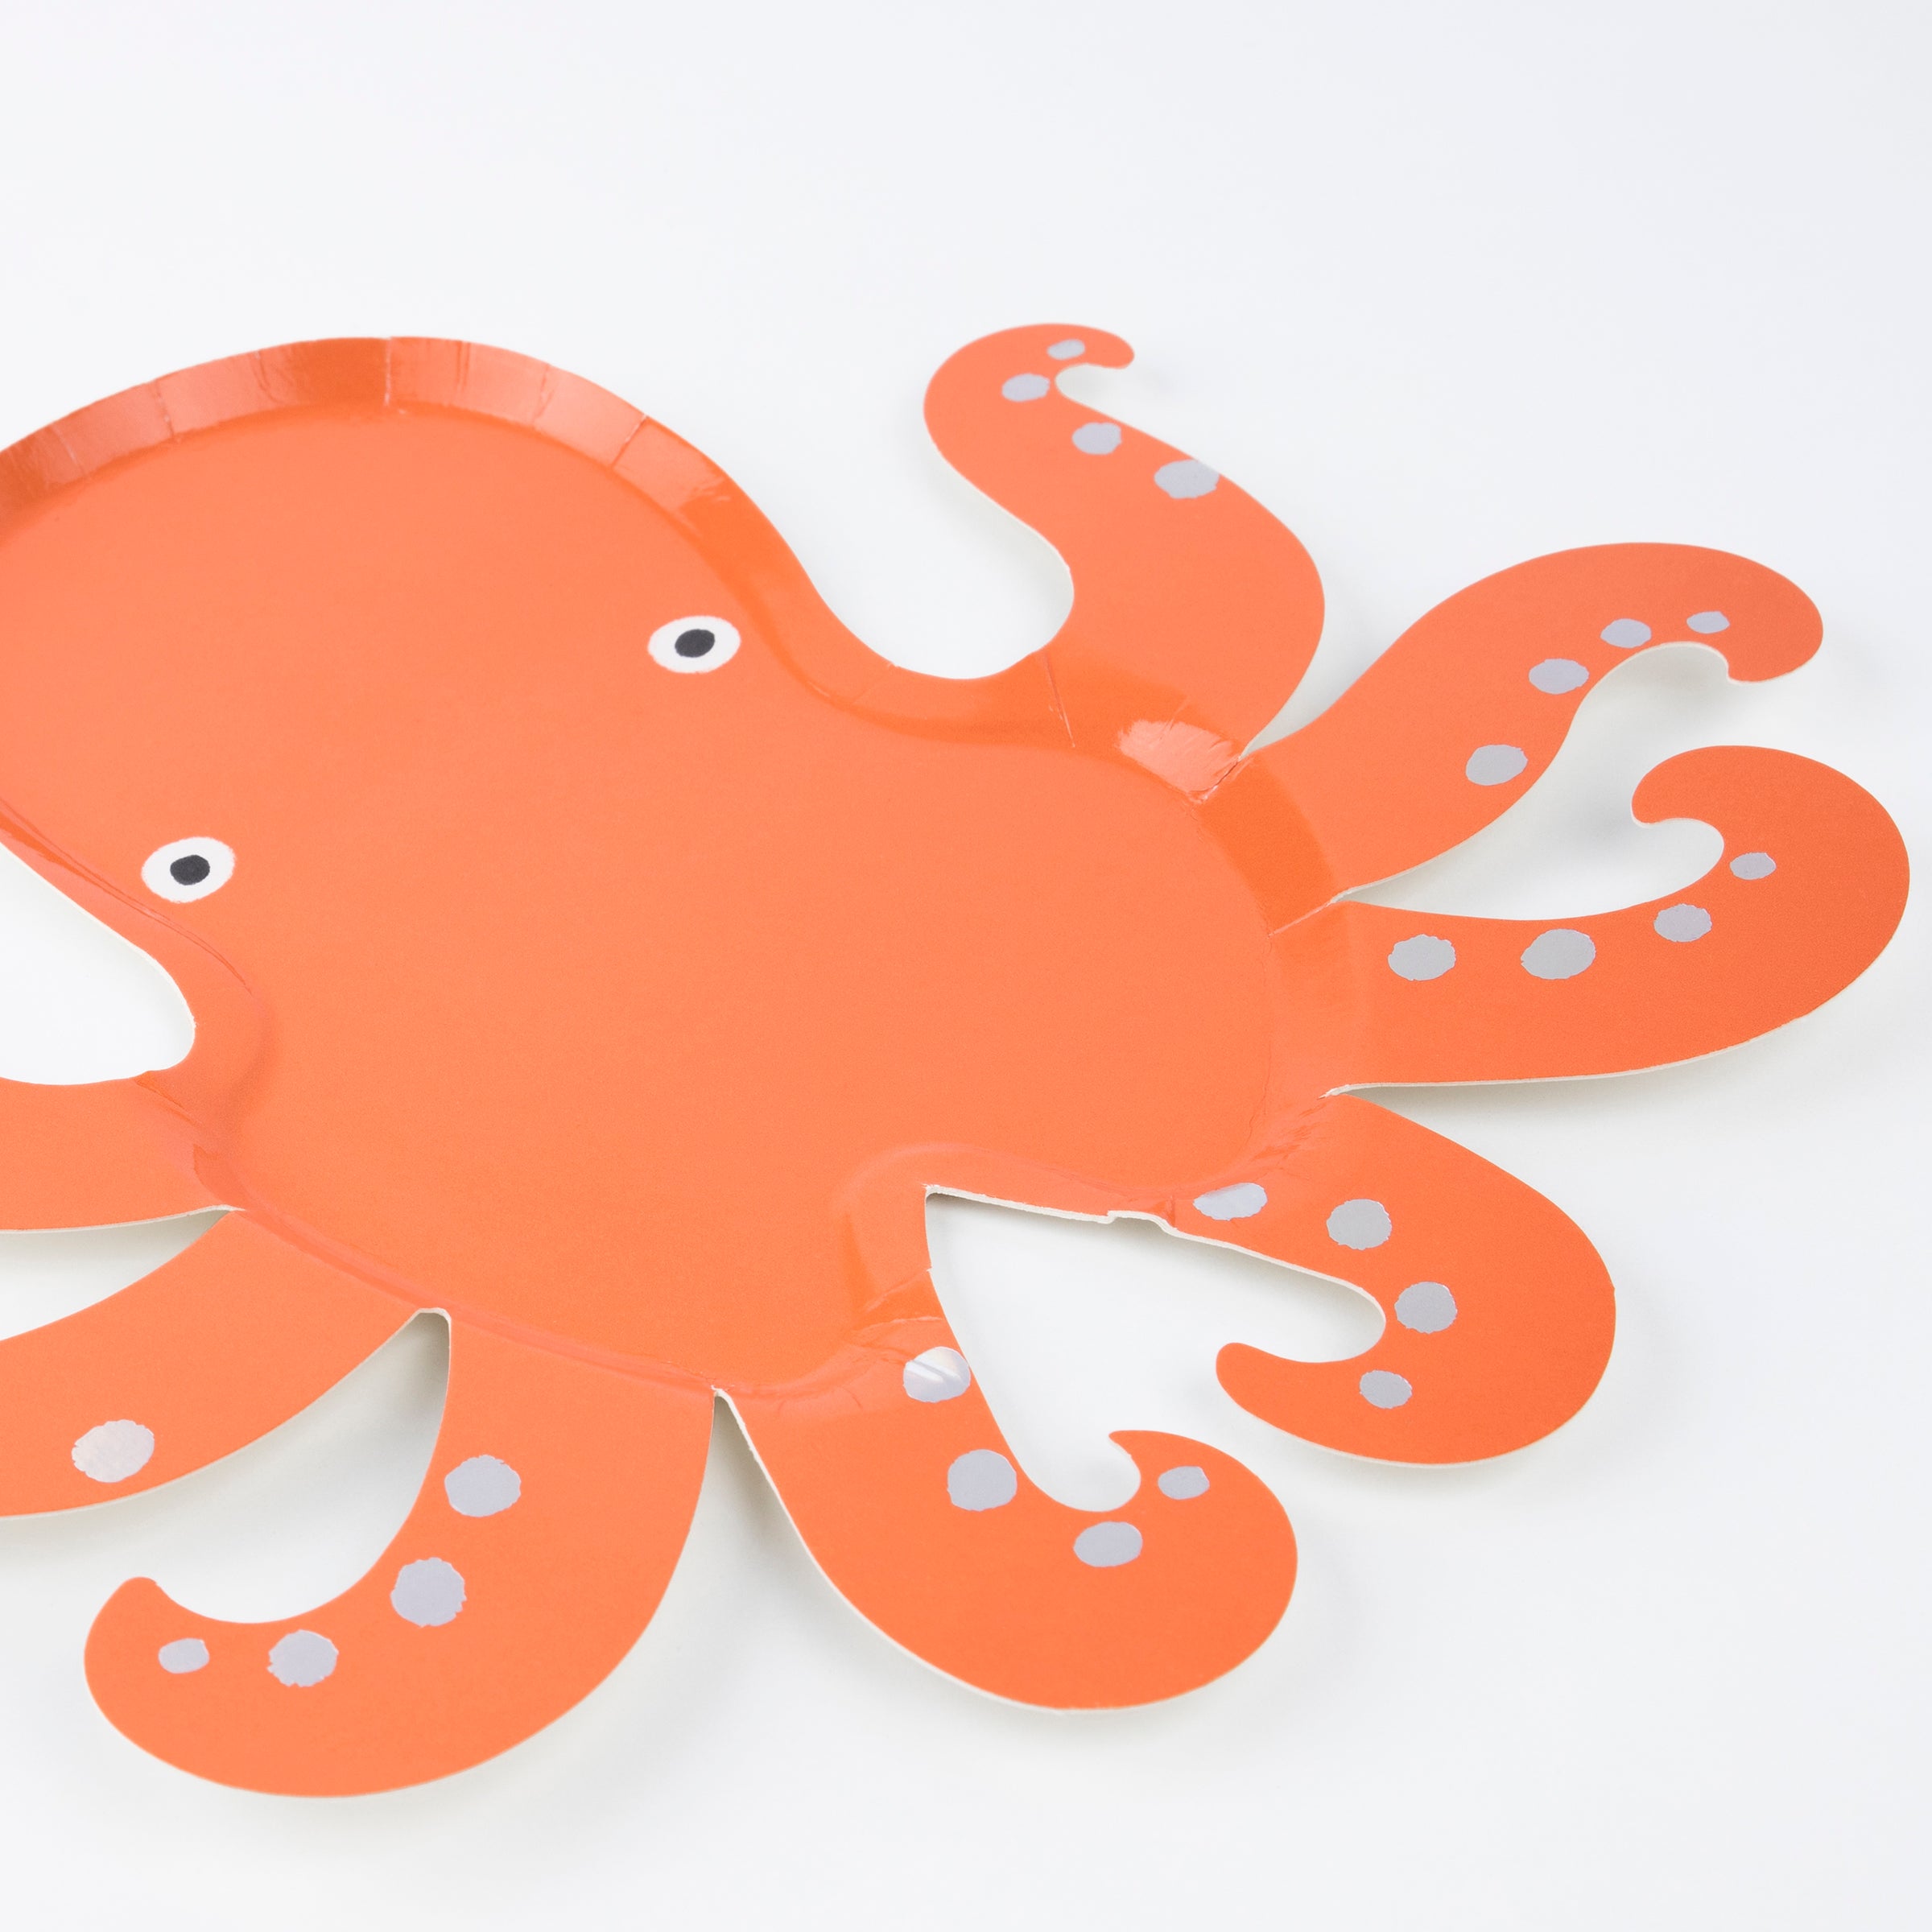 Our octopus red plates are perfect for an under-the sea party or cocktail party.